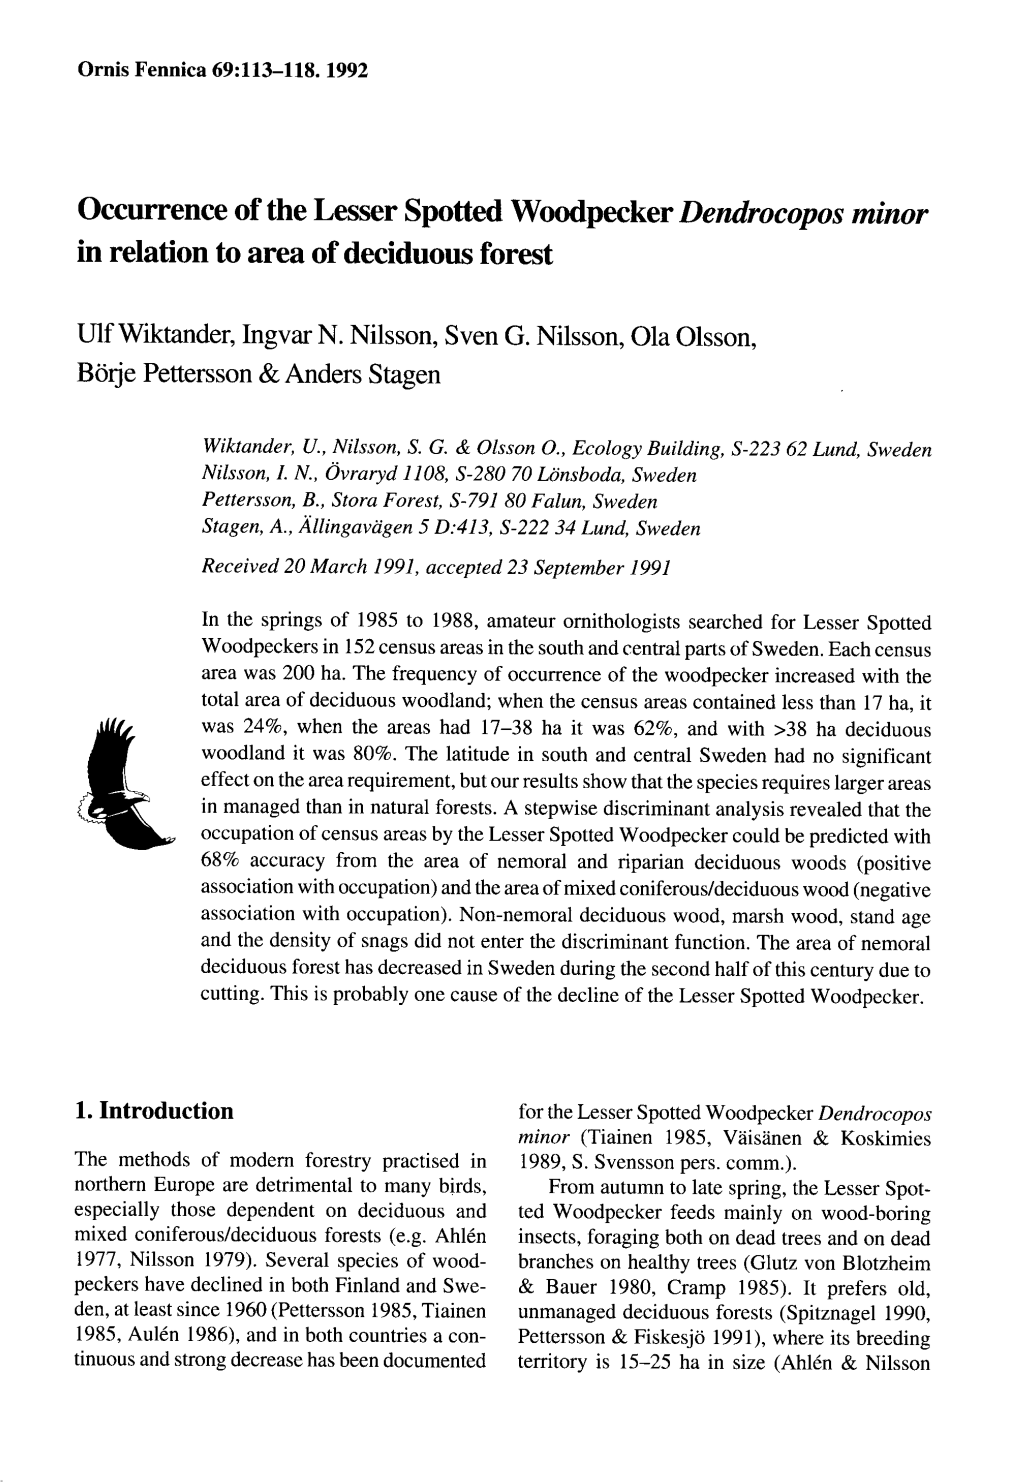 Occurrence of the Lesser Spotted Woodpecker Dendrocopos Minor in Relation to Area of Deciduous Forest